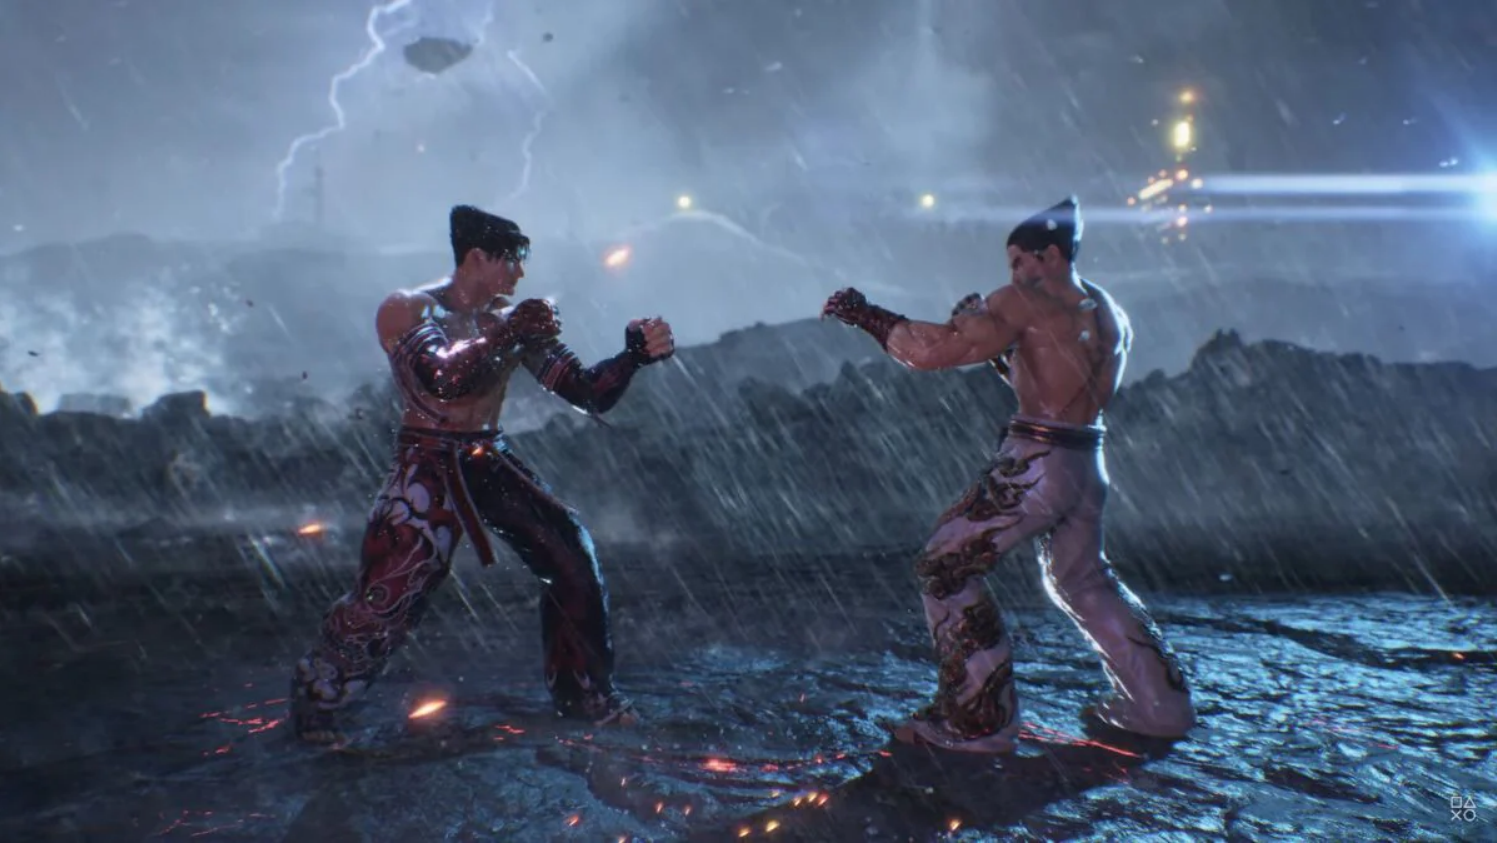 Tekken 8 roster – every confirmed and leaked character